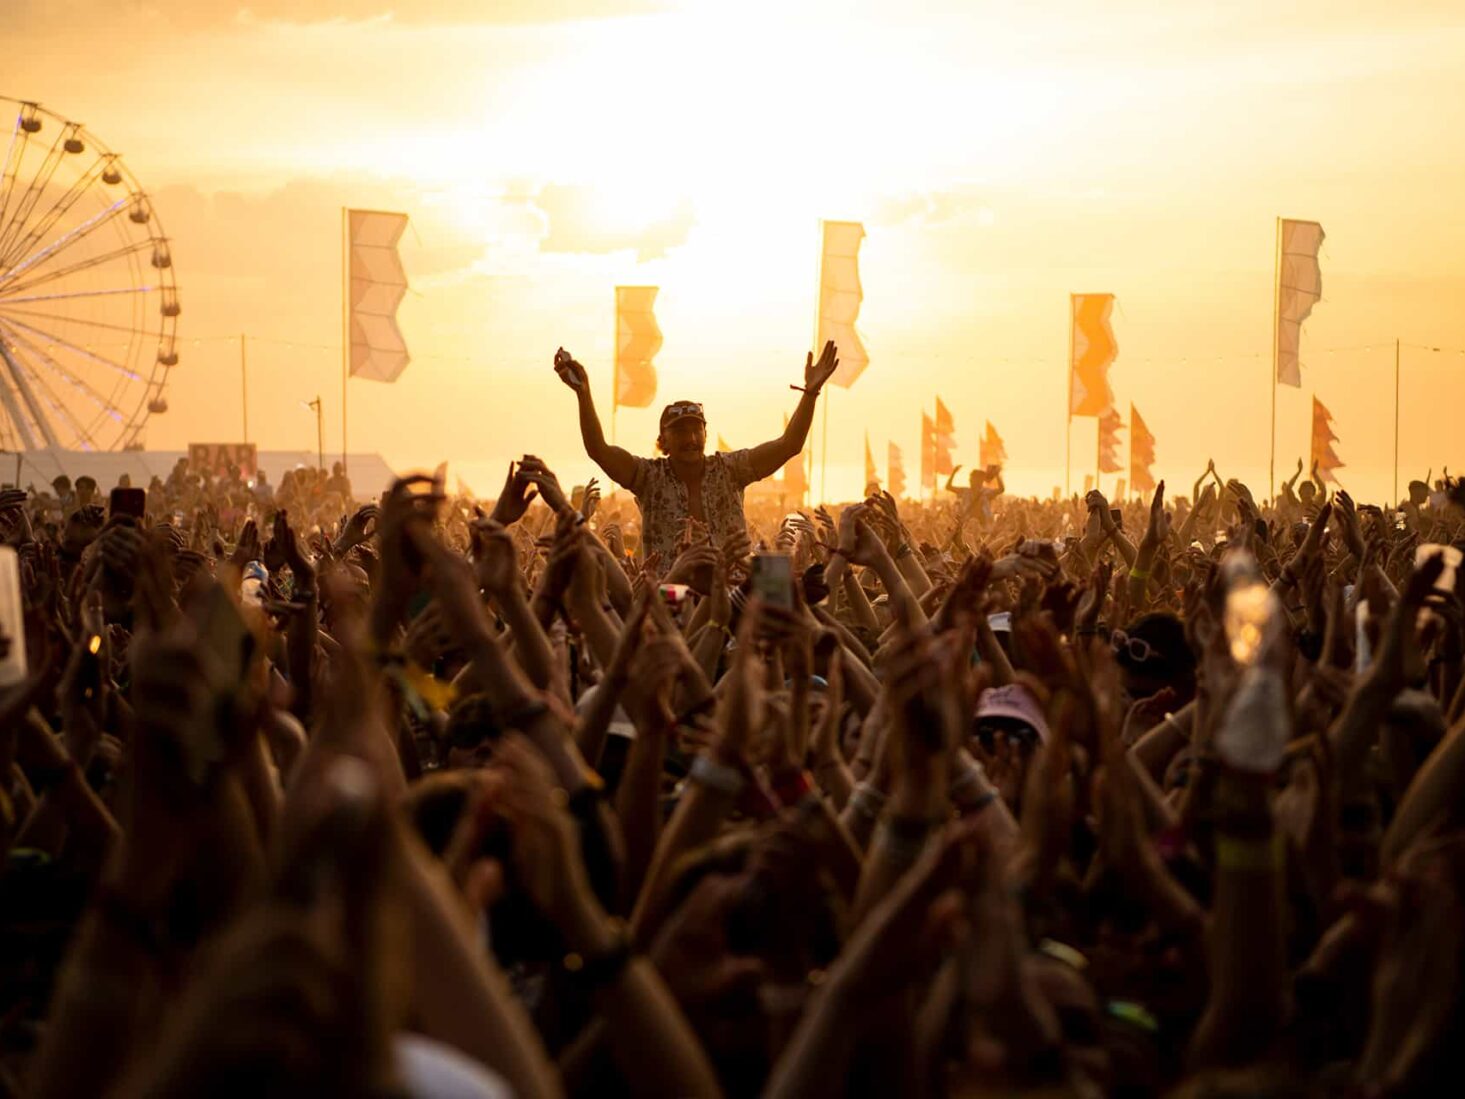 The top UK music festivals in 2023